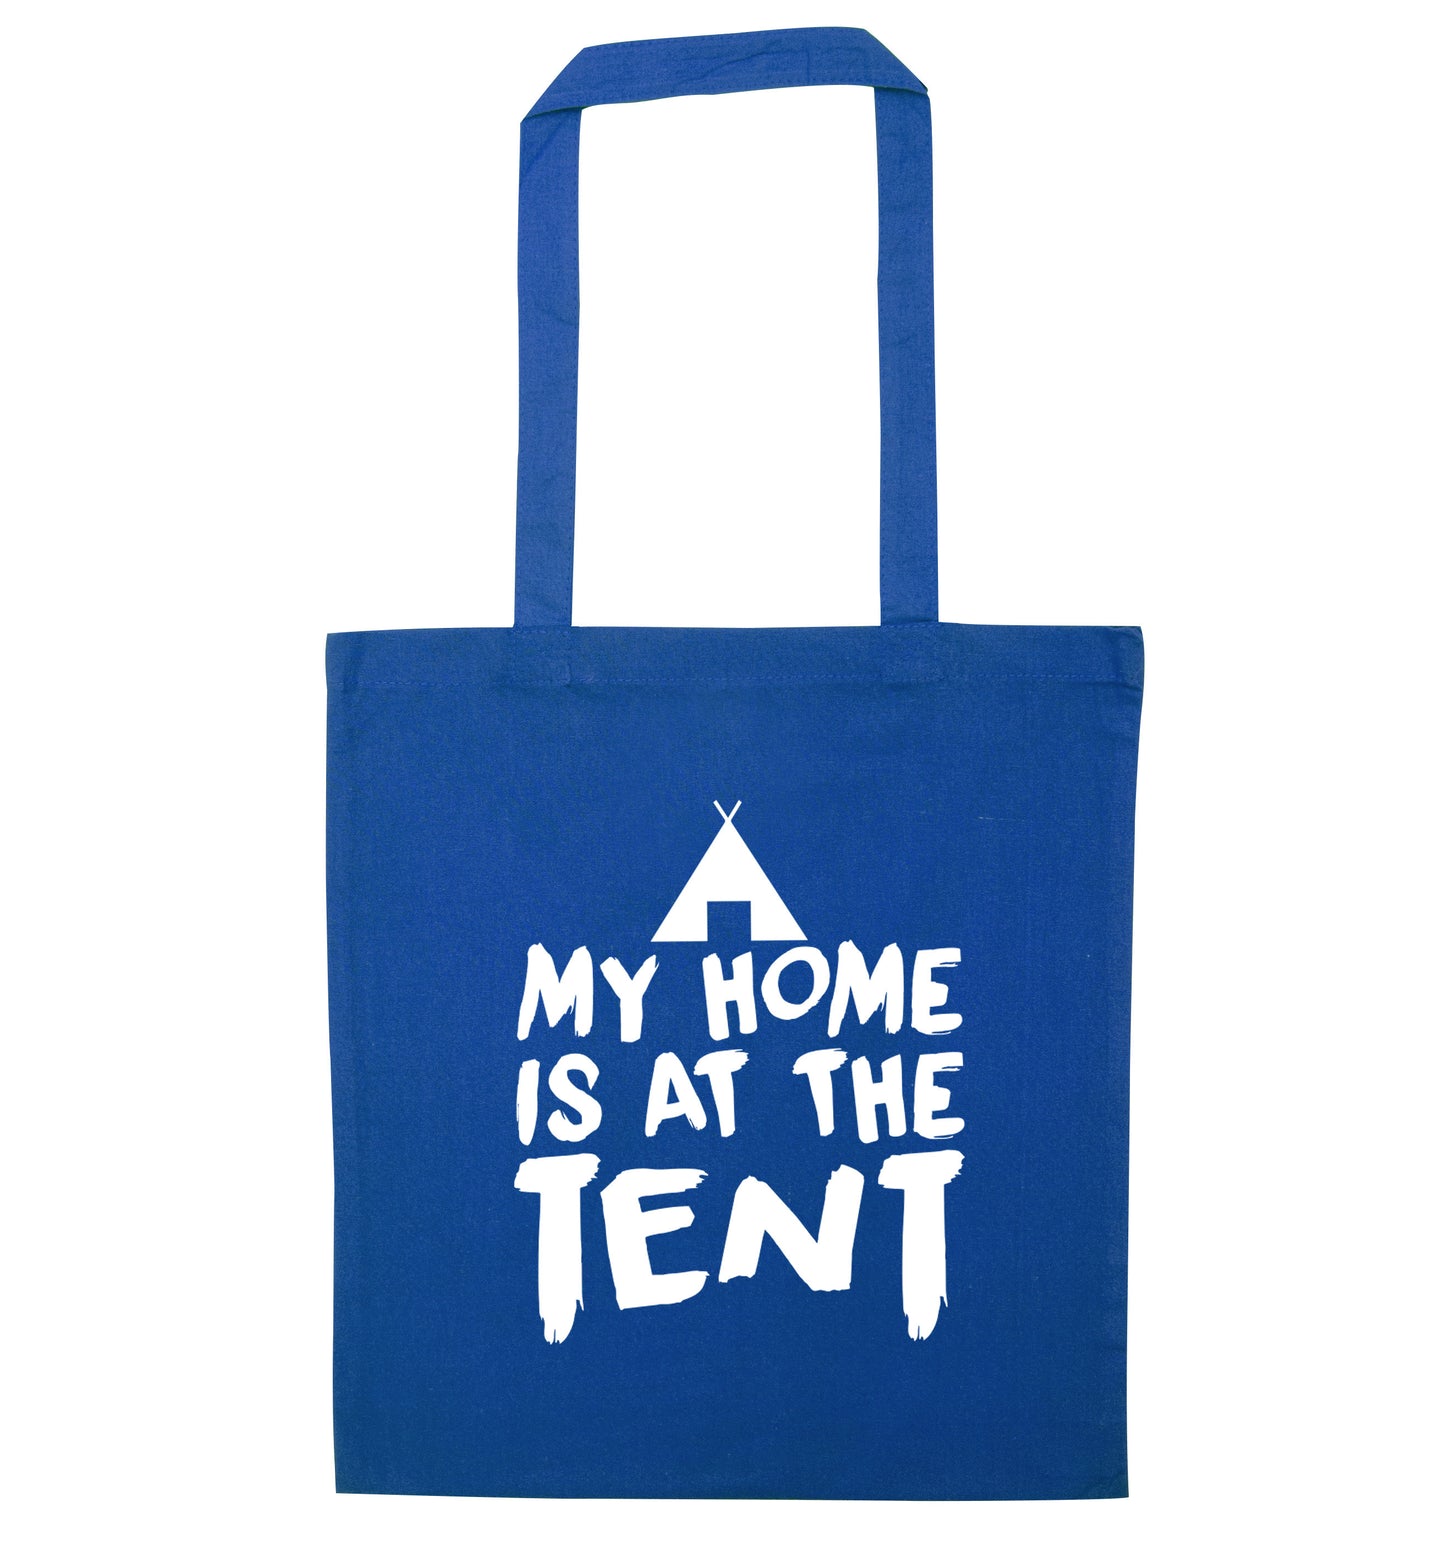 My home is at the tent blue tote bag